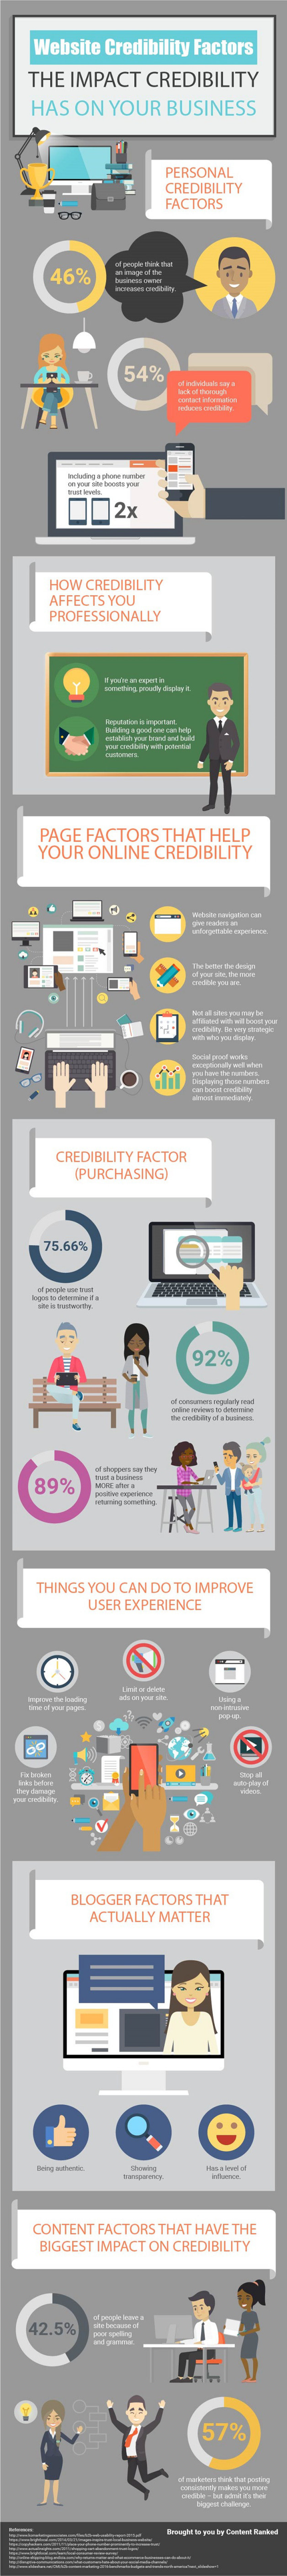 The Incredible Credible Website: How Credibility Boosts Your Business [Infographic] - MarketingProfs | The MarTech Digest | Scoop.it